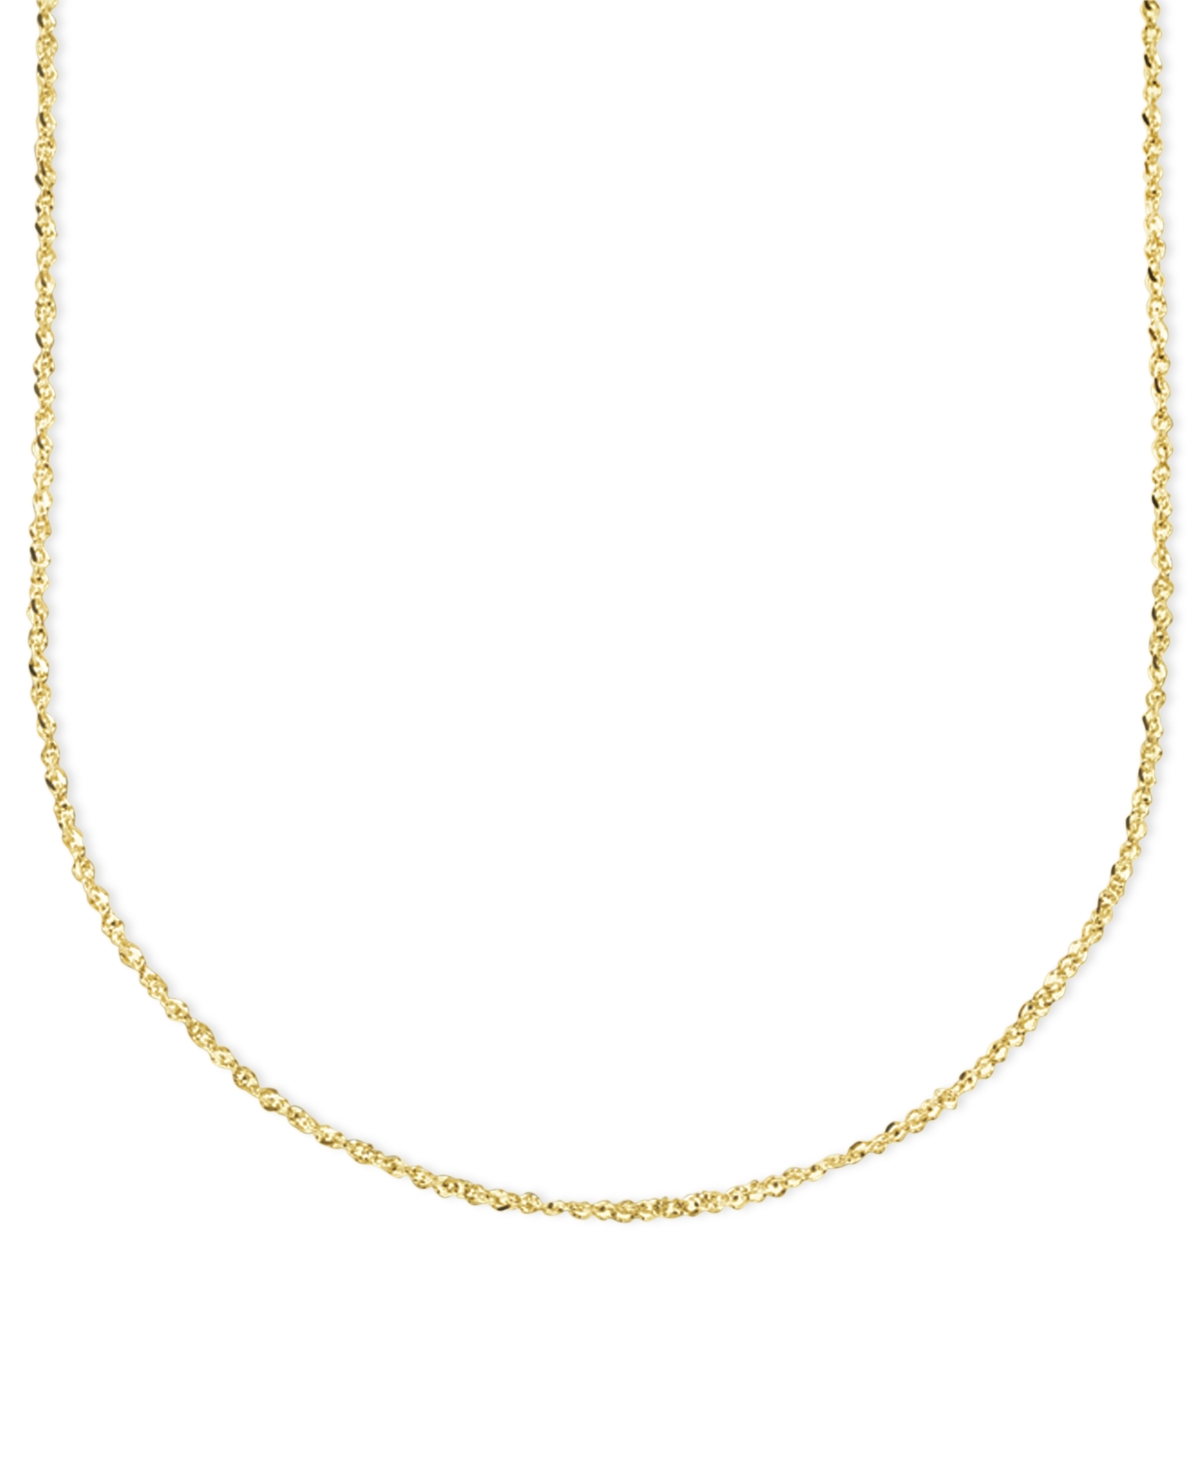 14k Gold Necklace, 16" Perfectina Chain Necklace (1-1/8mm) - Yellow Gold